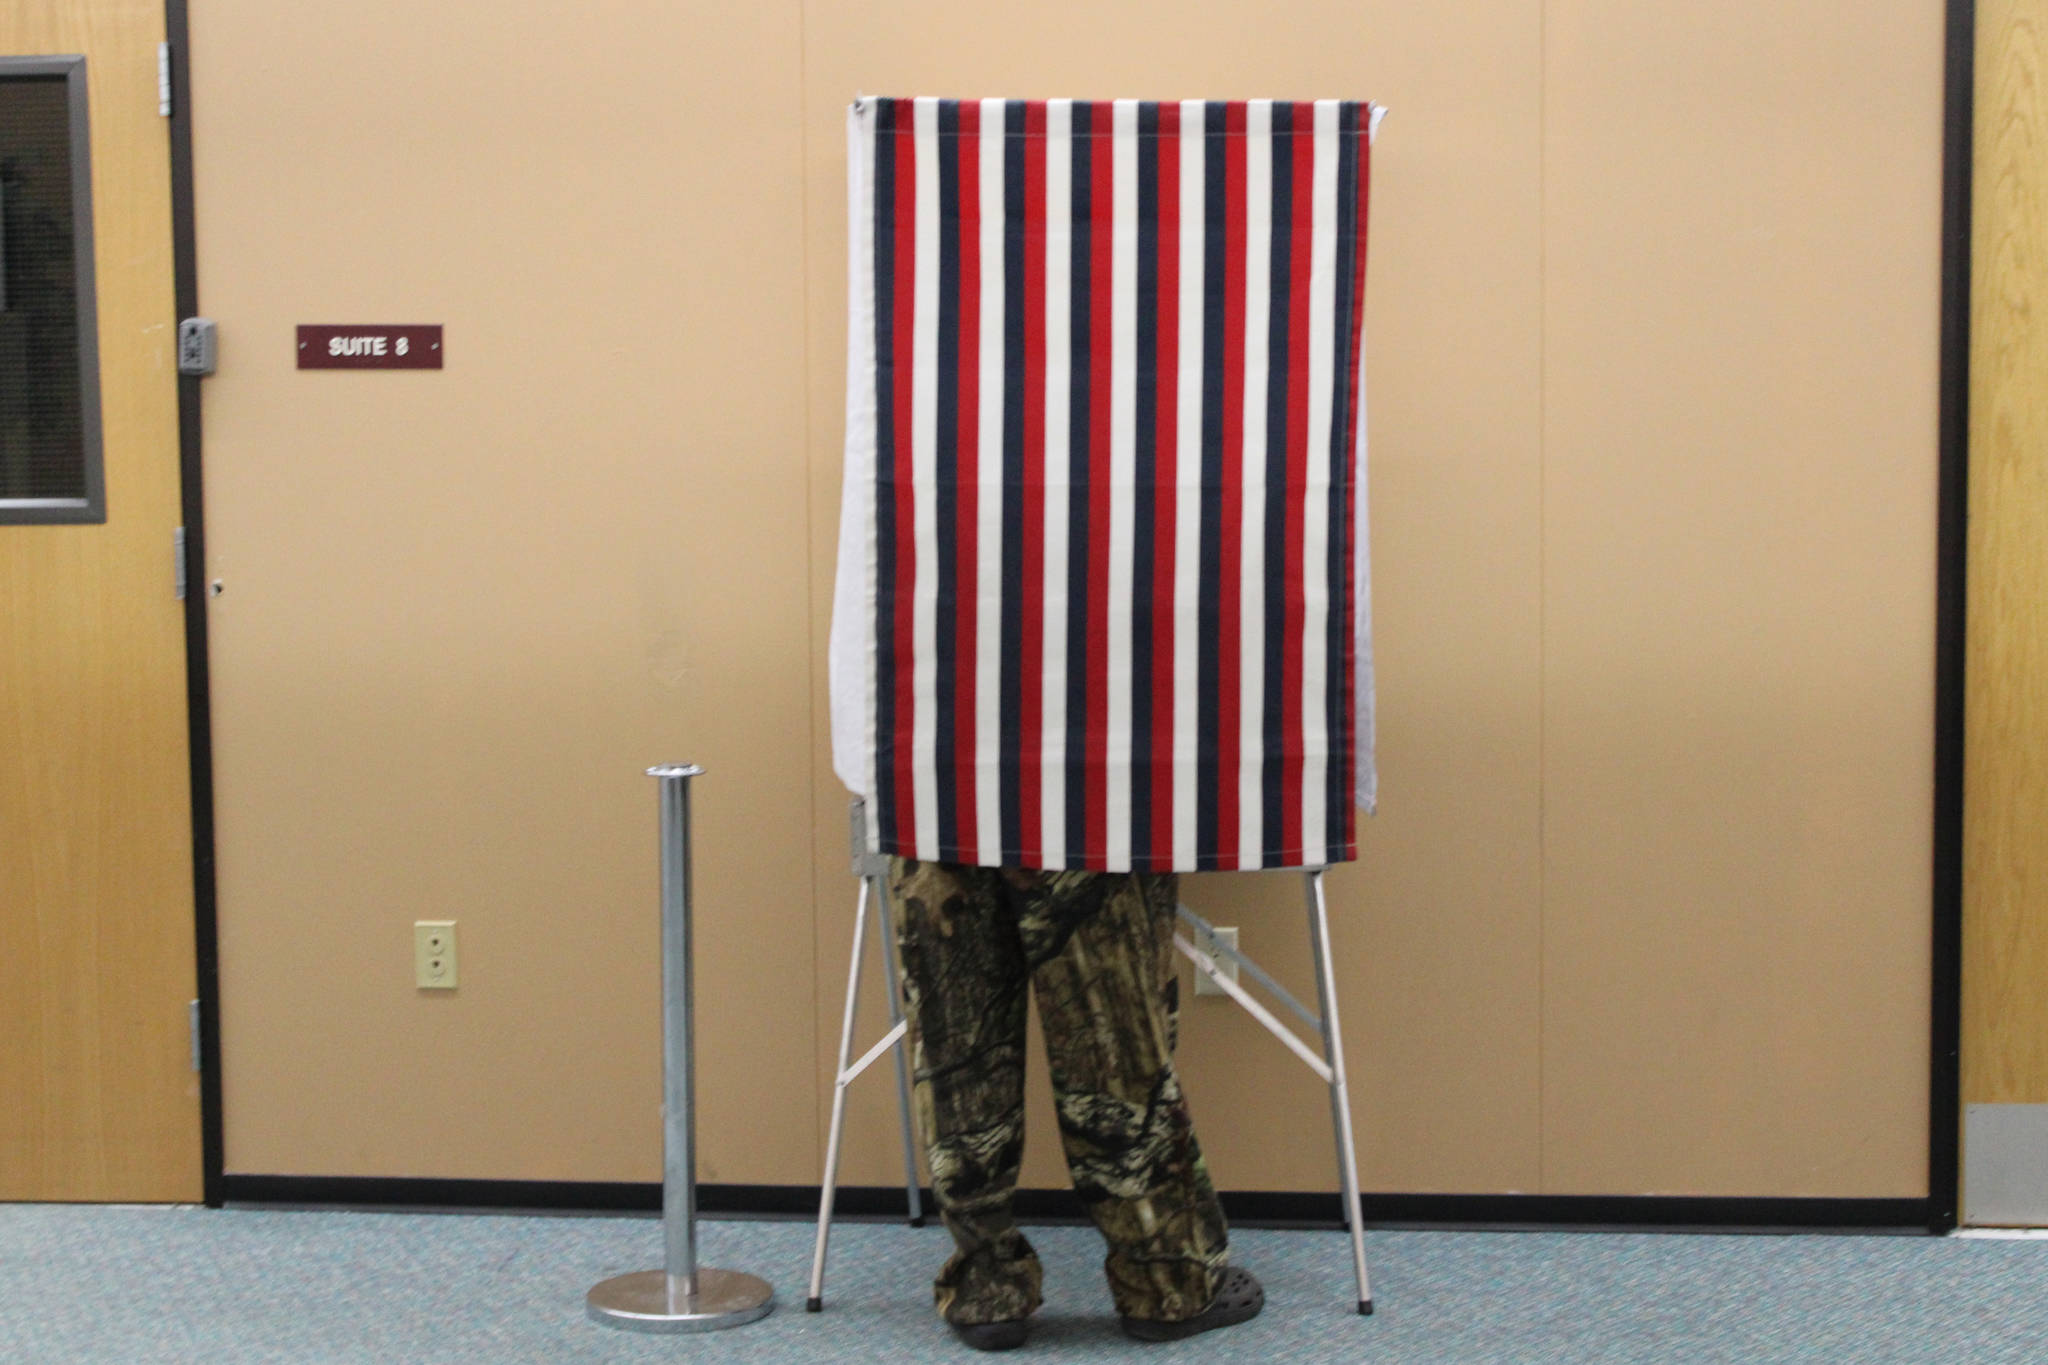 A man votes takes advantage of early voting at the Mendenhall Mall on Oct. 22, 2020. The FBI issued public guidance ahead of the general election warning voters about what is and isn’t federal election crime, and how to report such crimes if they’re spotted. (Ben Hohenstatt / Juneau Empire)